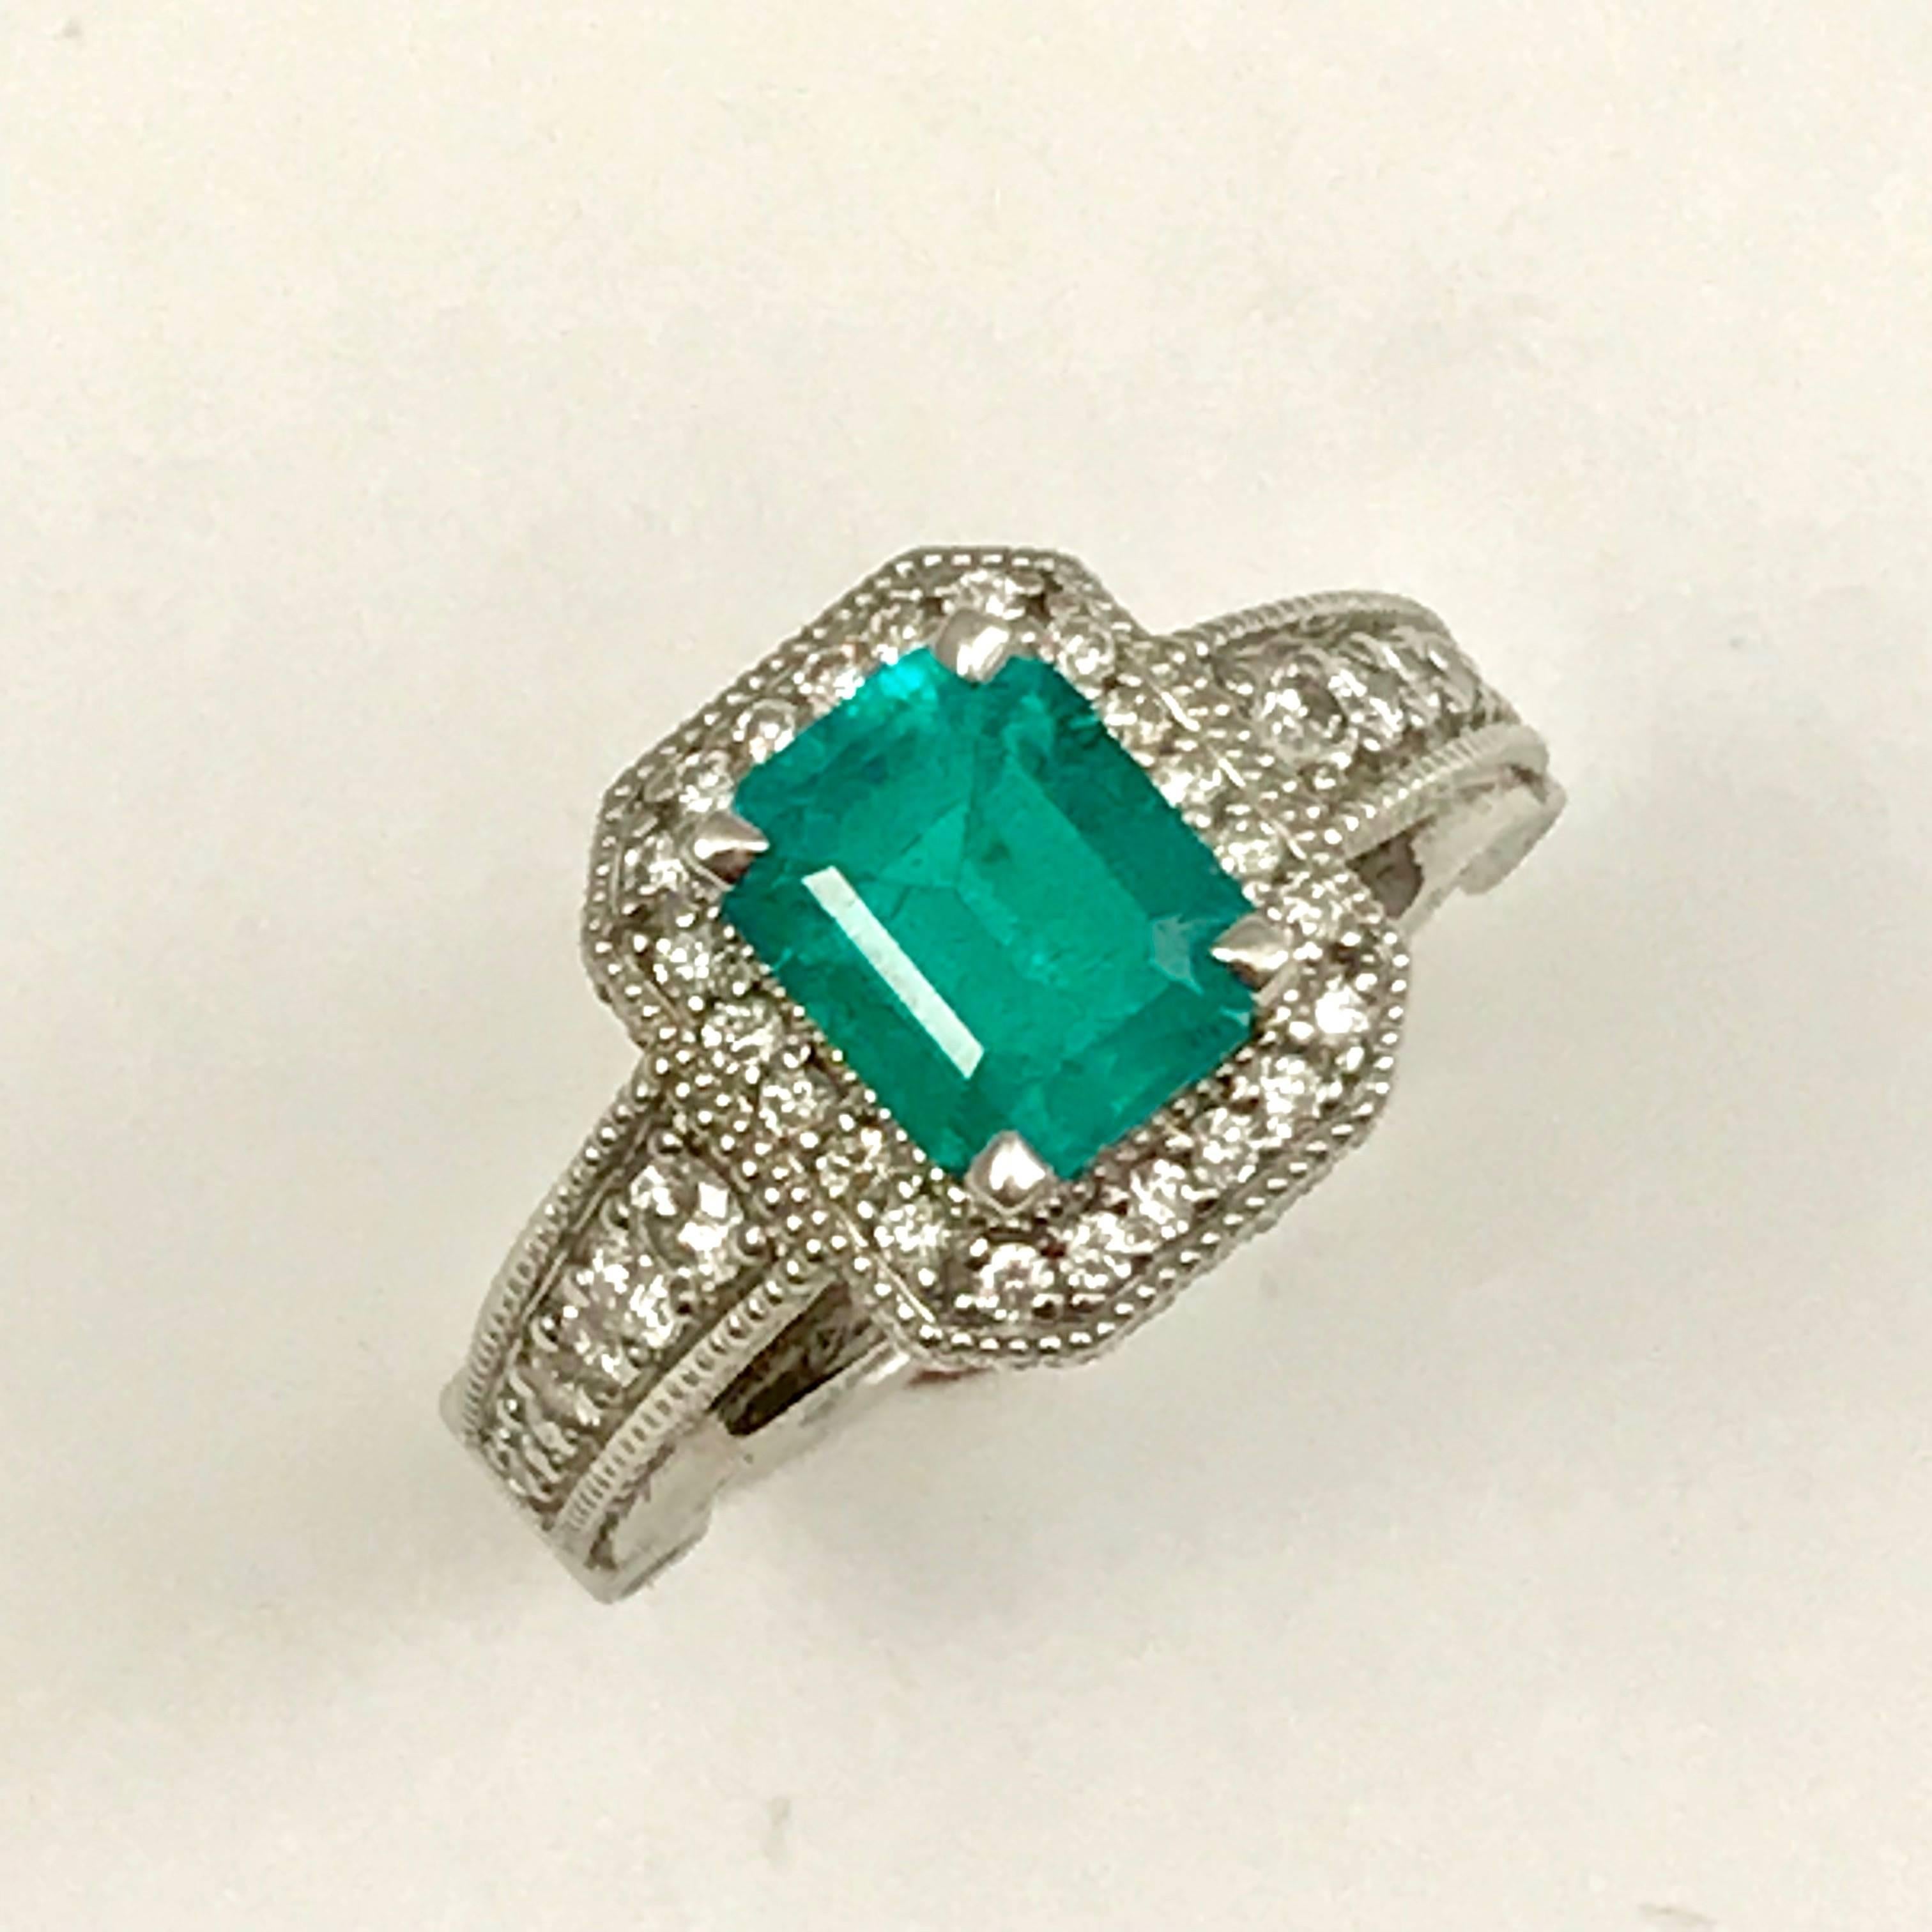 Emerald Cut 1.56 Carat Colombian Emerald Cocktail Ring Set in 14 Karat White Gold For Sale